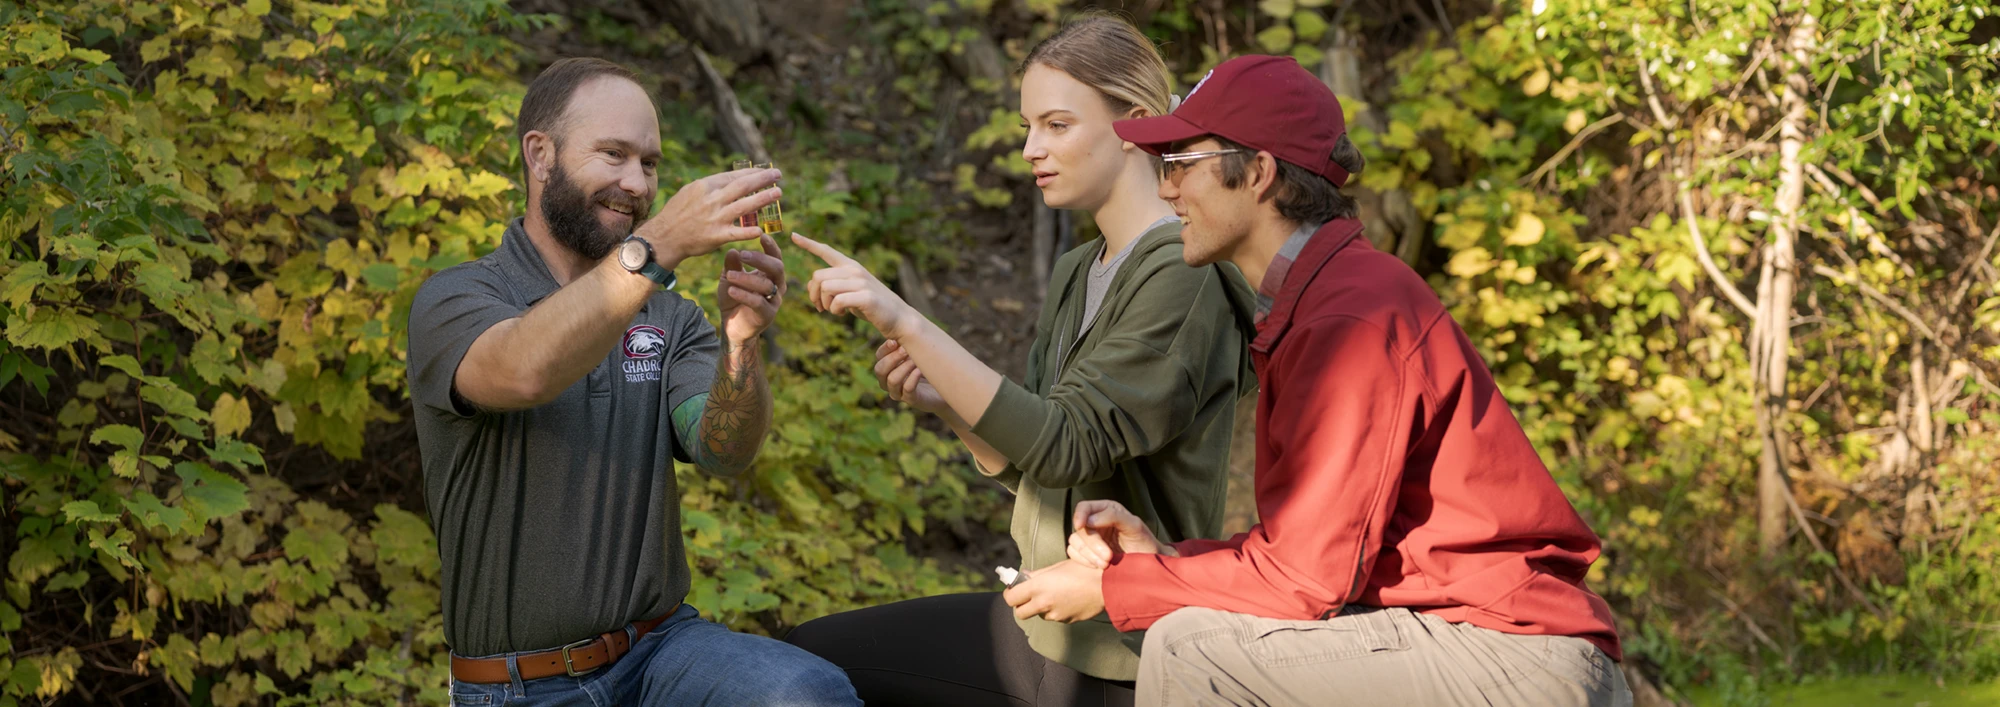 A rangeland professor and two students examing a water sample during a field trip